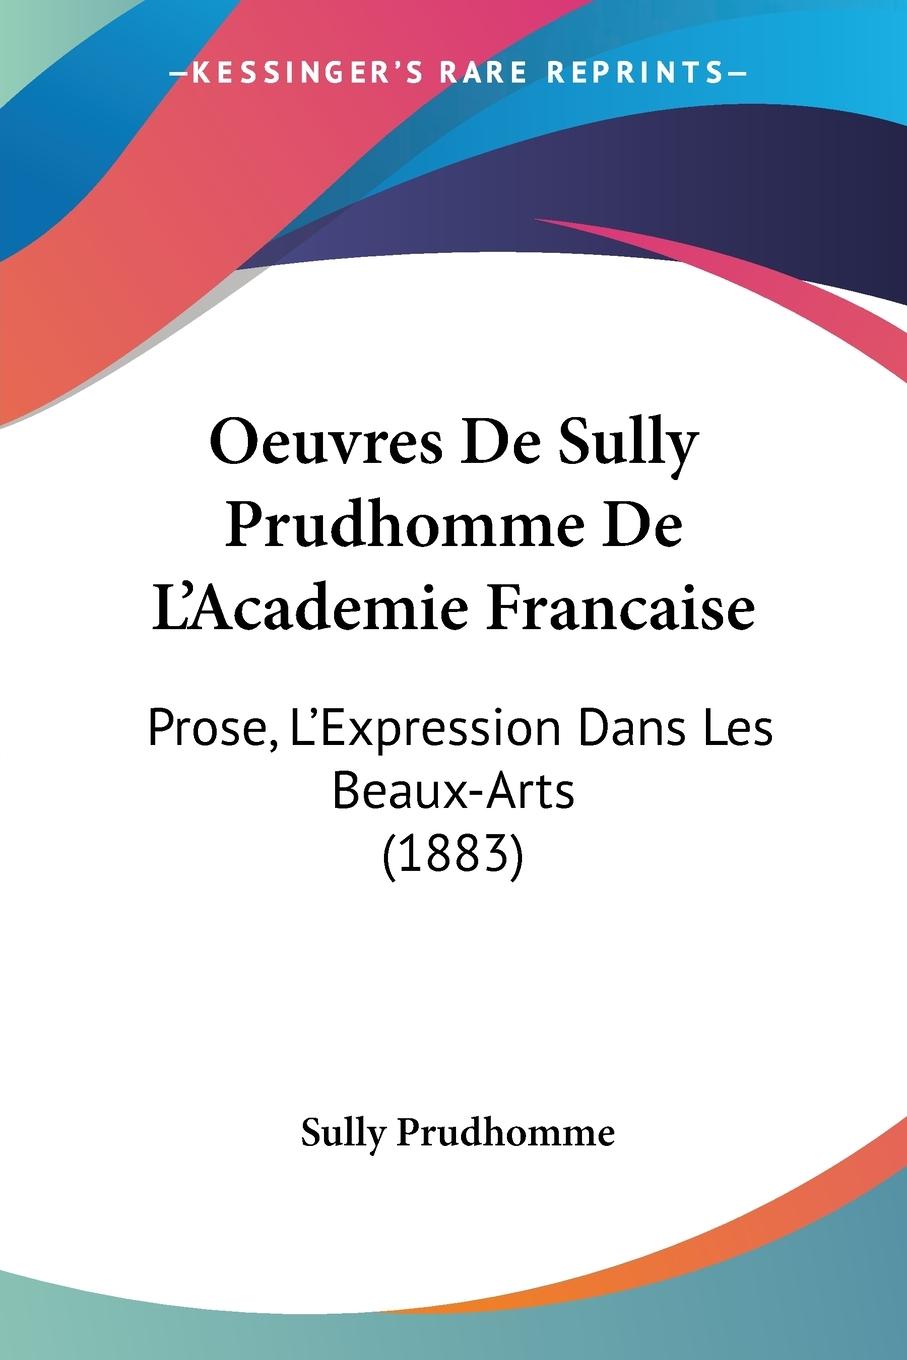 Oeuvres De Sully Prudhomme De L Academie Francaise - Prudhomme, Sully